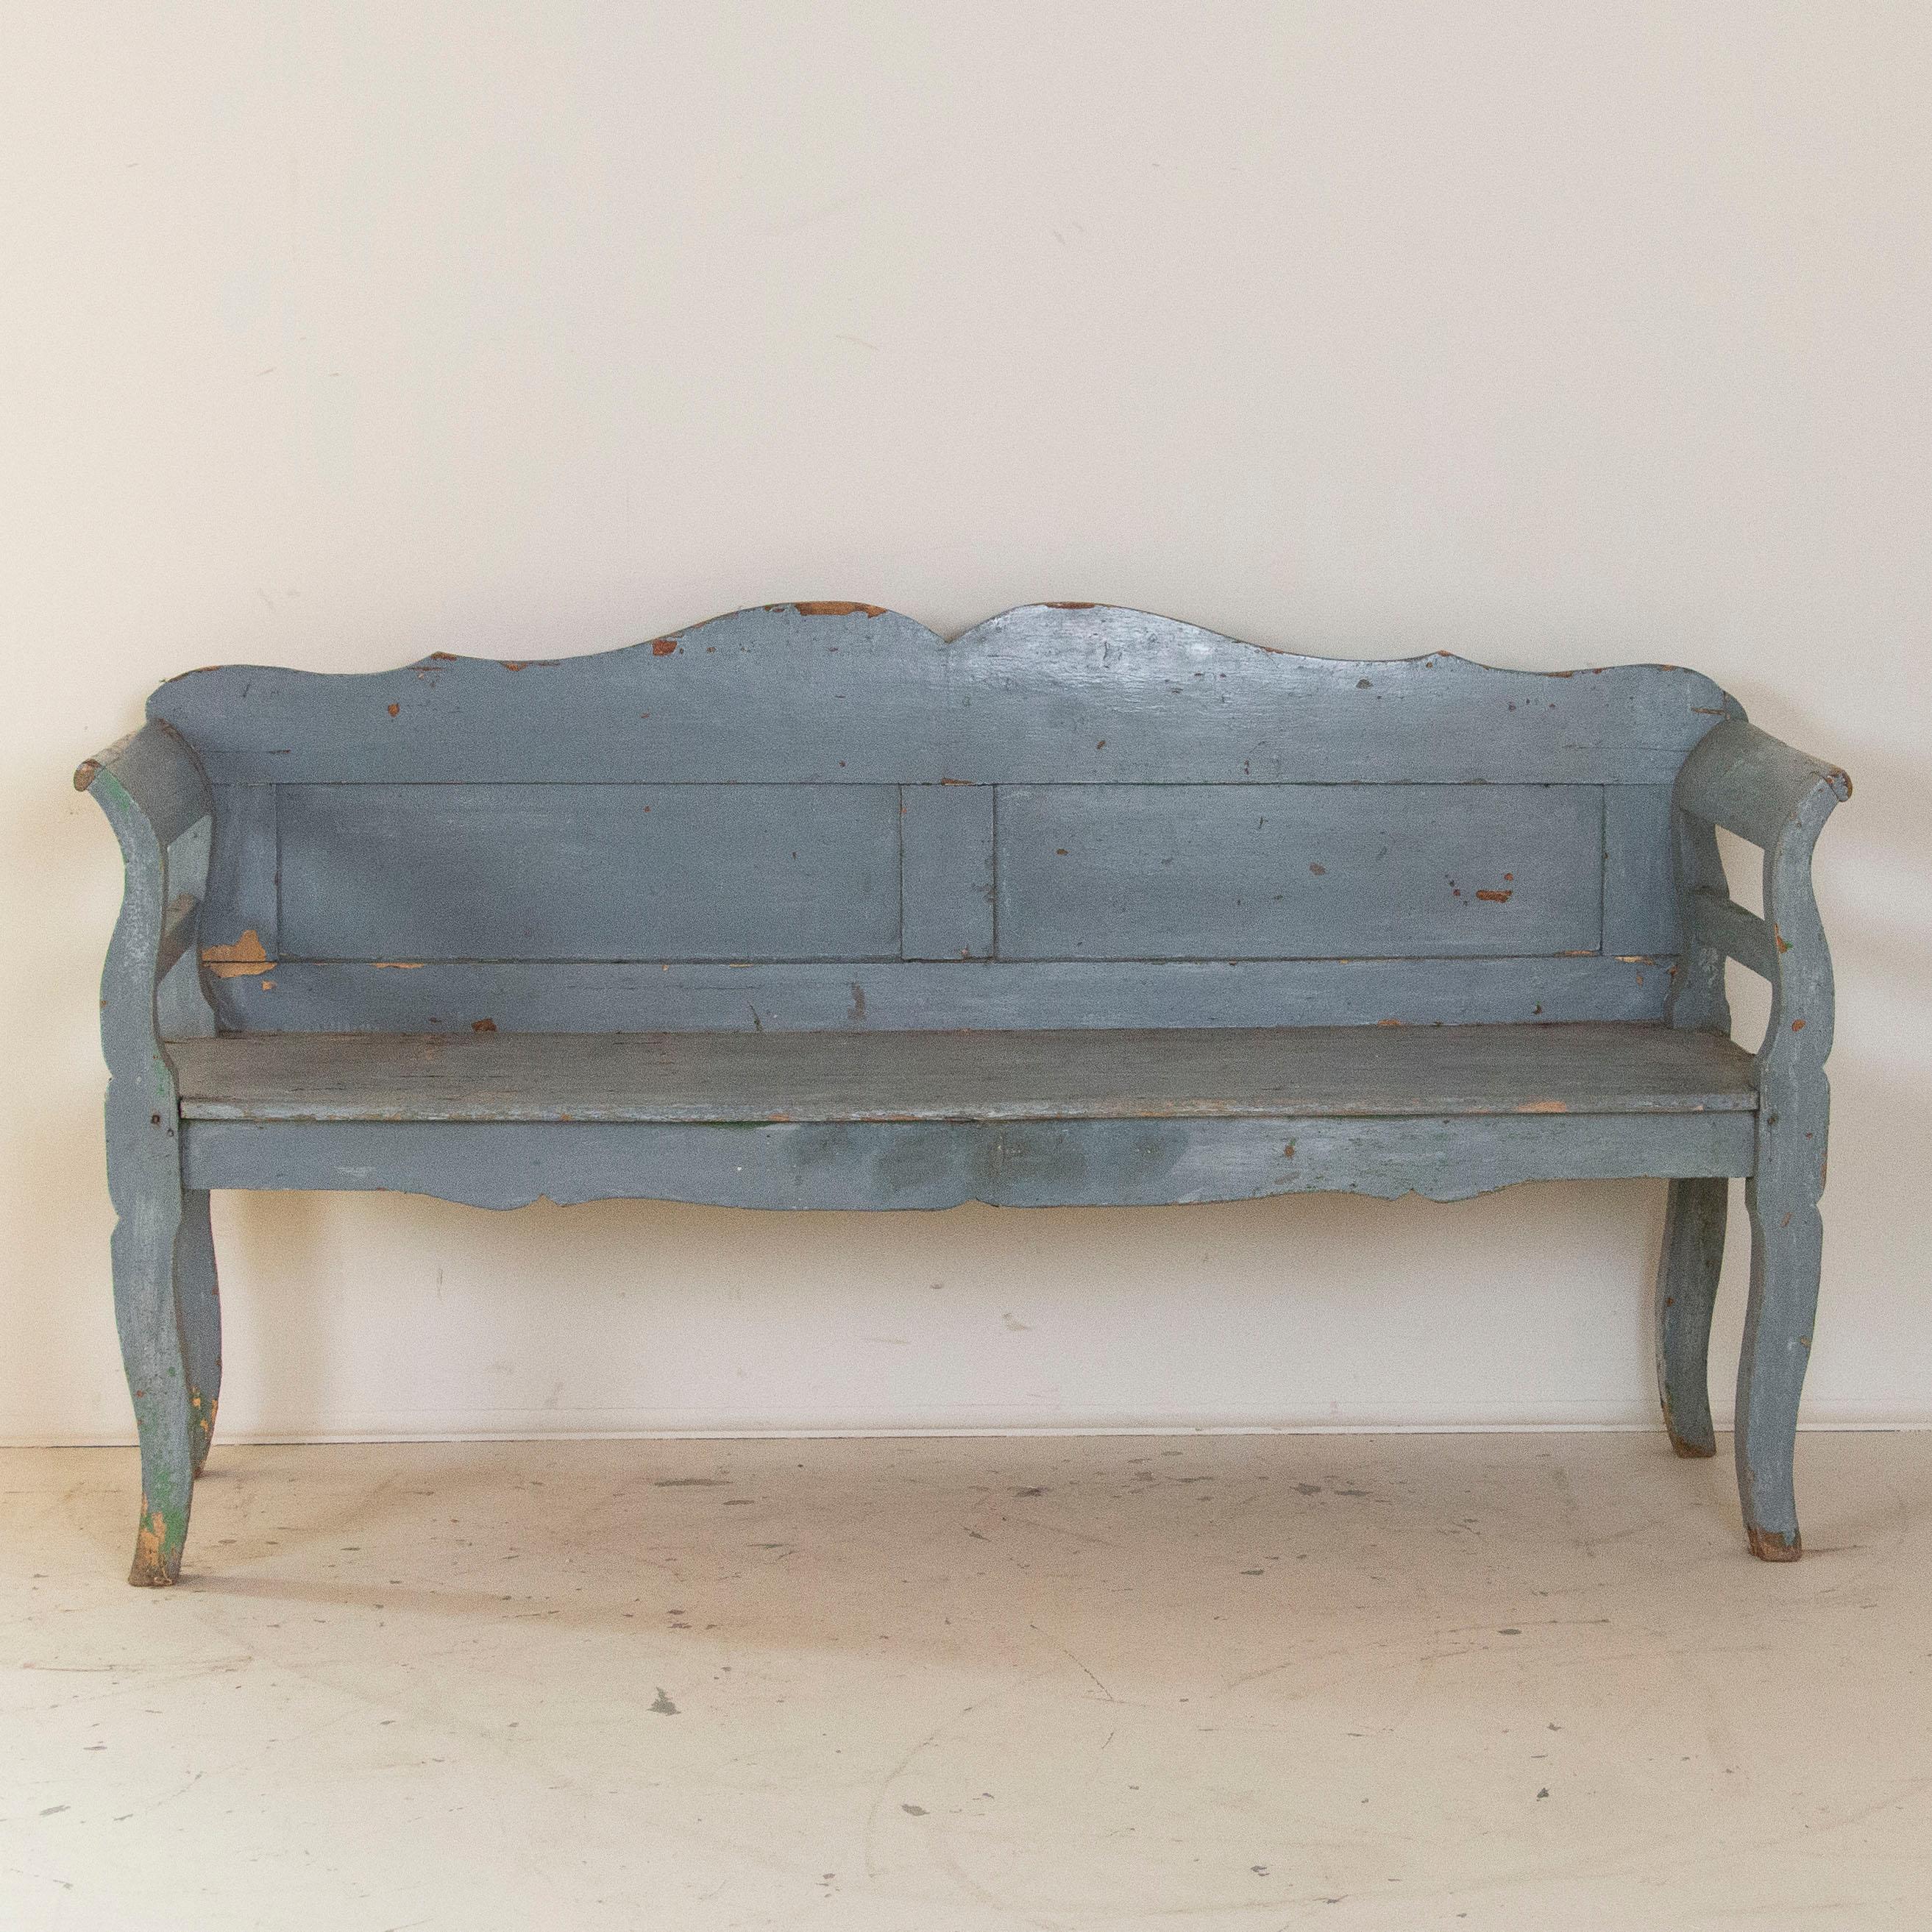 Hungarian Antique Hand Painted Blue Bench, Hungary